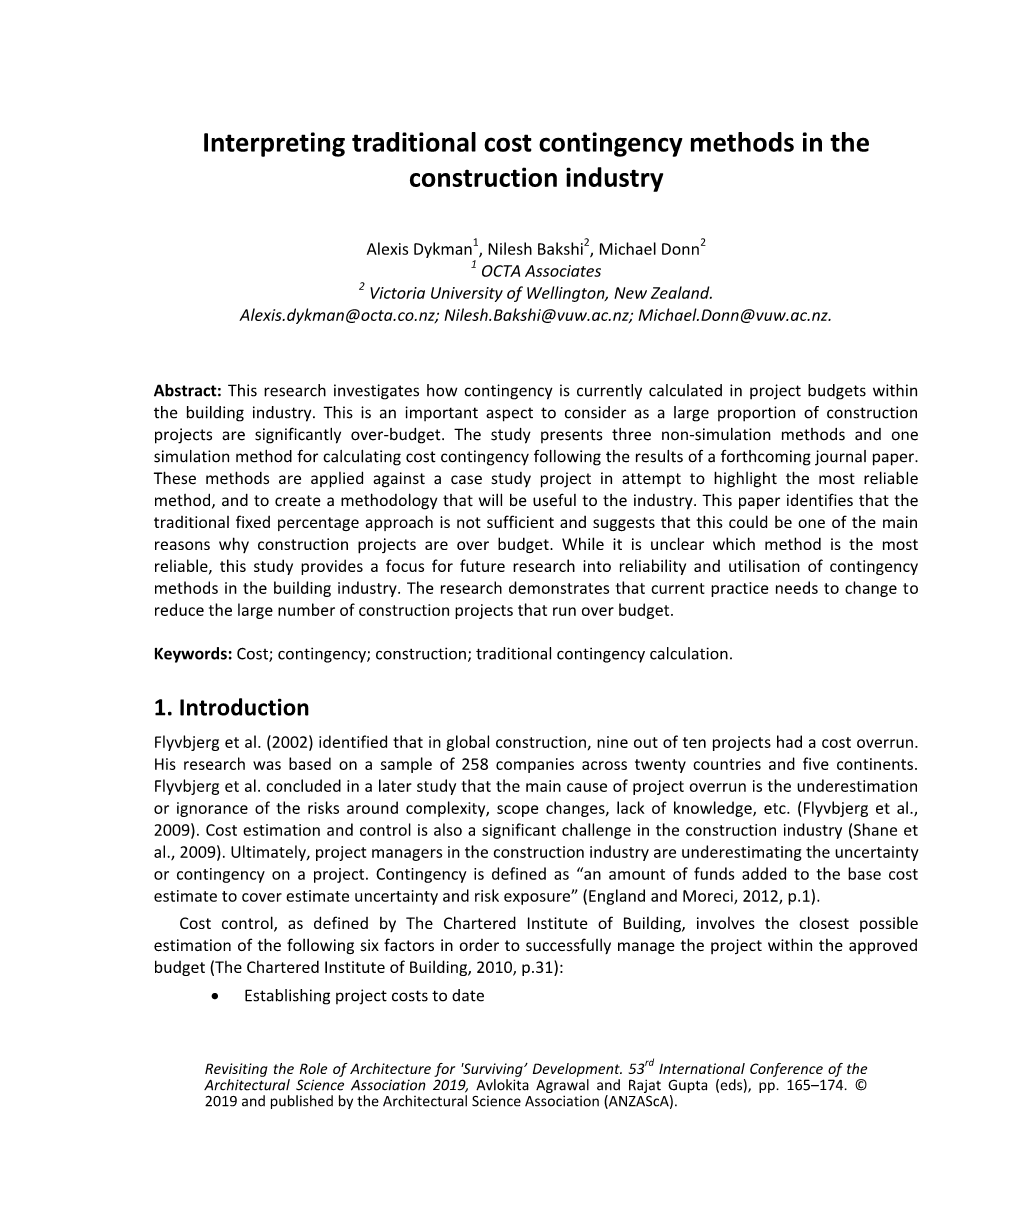 Interpreting Traditional Cost Contingency Methods in the Construction Industry